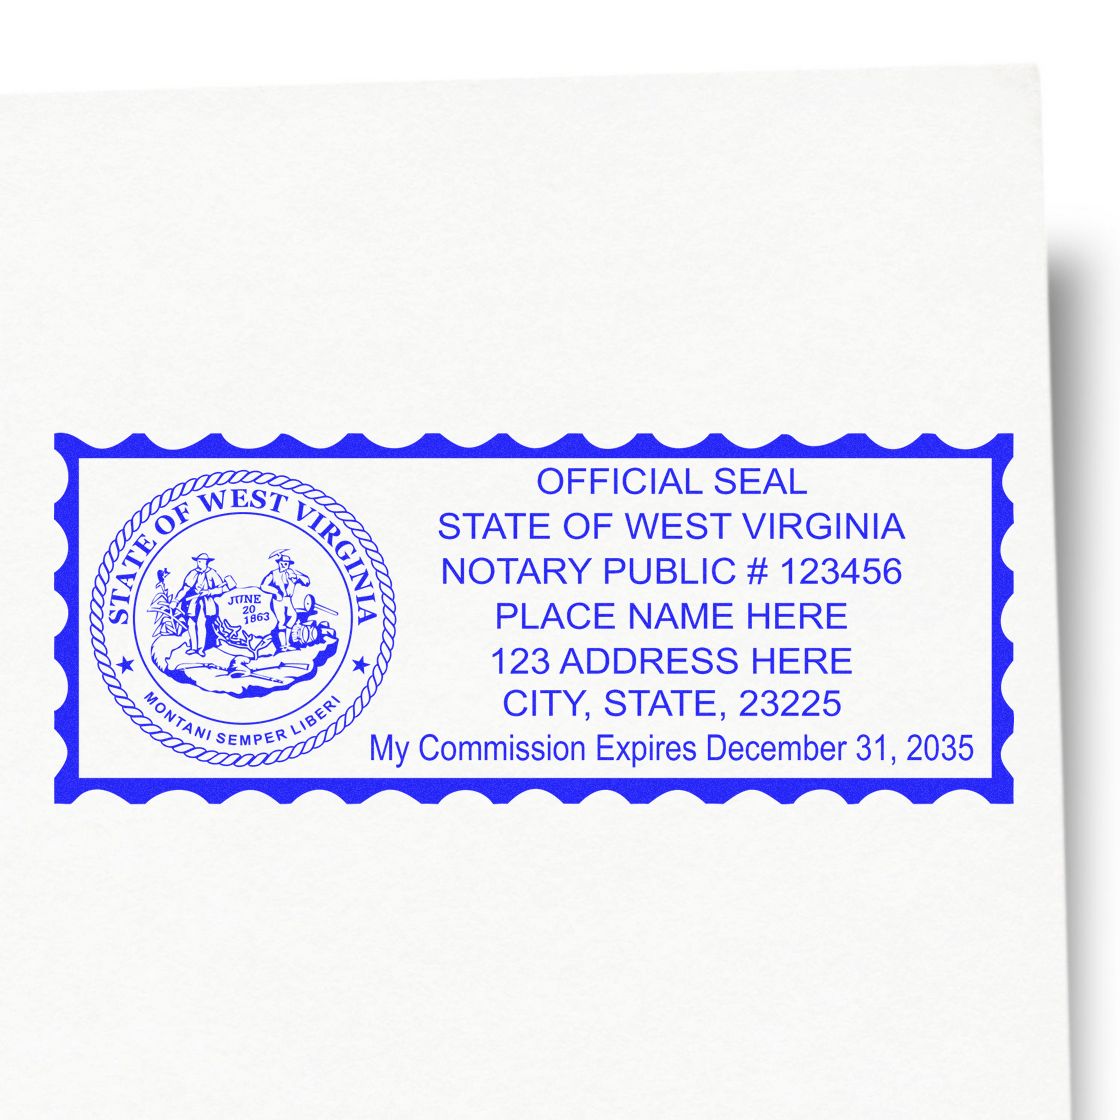 The MaxLight Premium Pre-Inked West Virginia State Seal Notarial Stamp stamp impression comes to life with a crisp, detailed photo on paper - showcasing true professional quality.